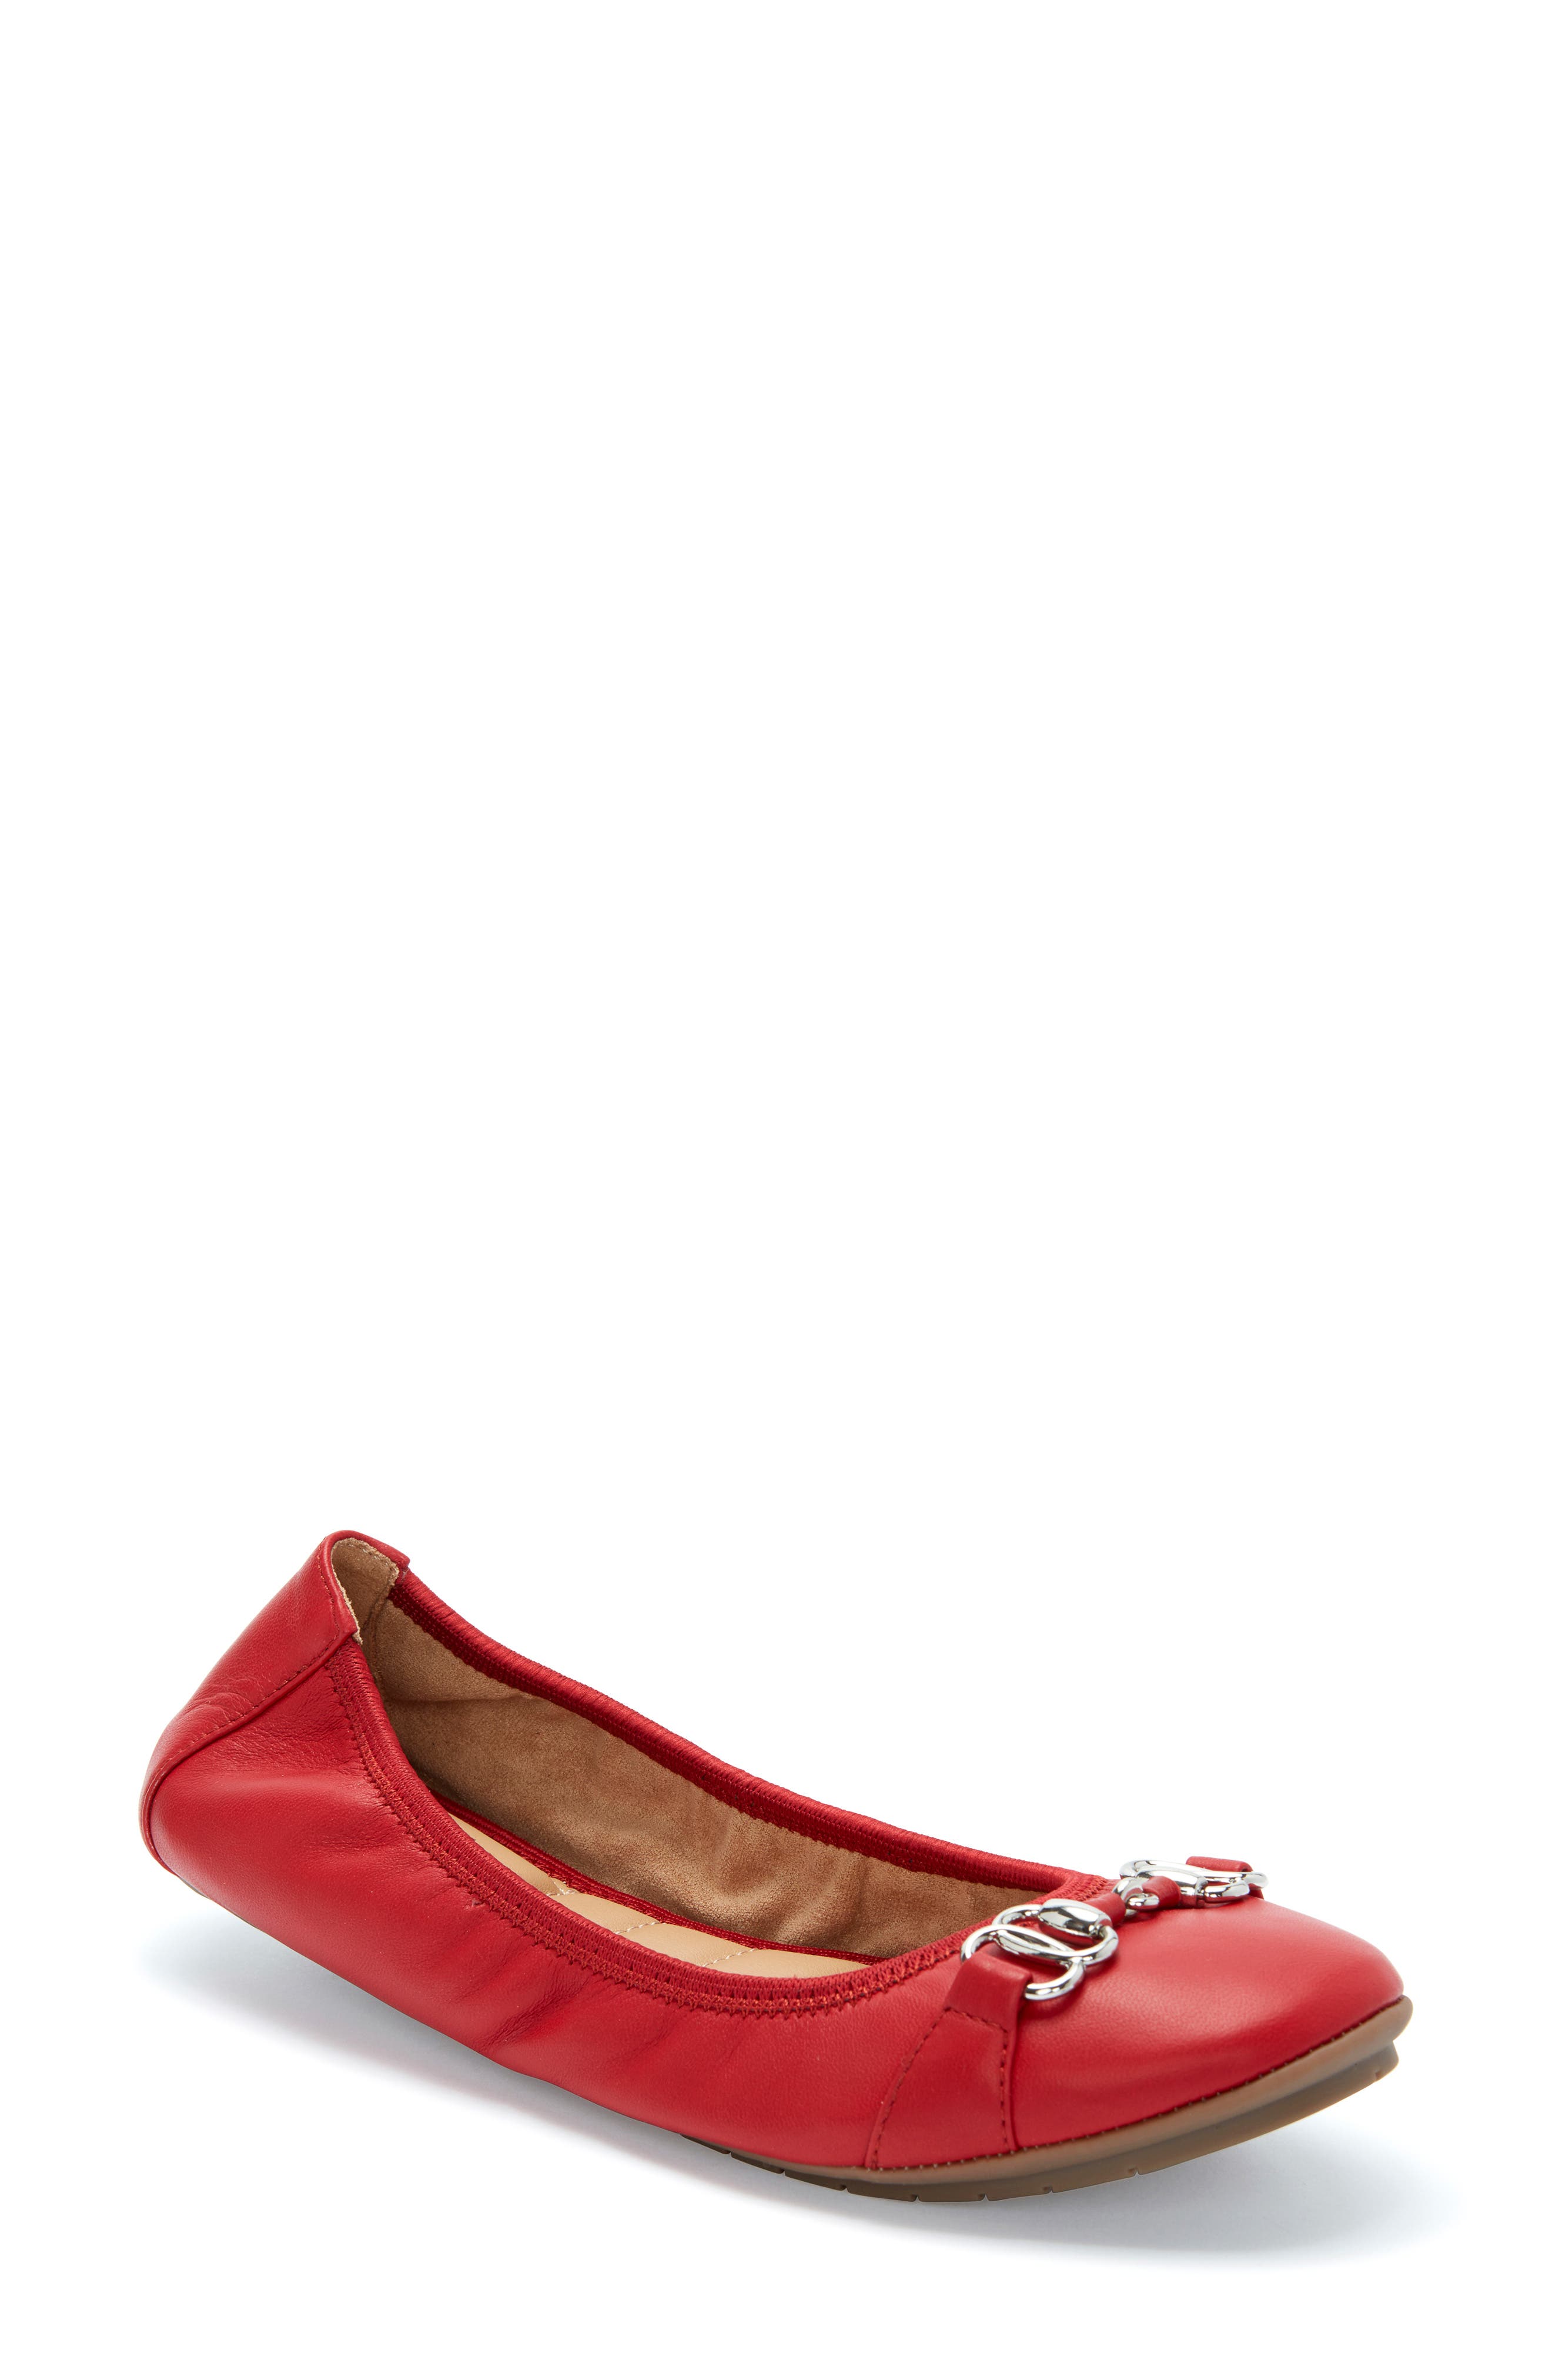 nordstrom red flats